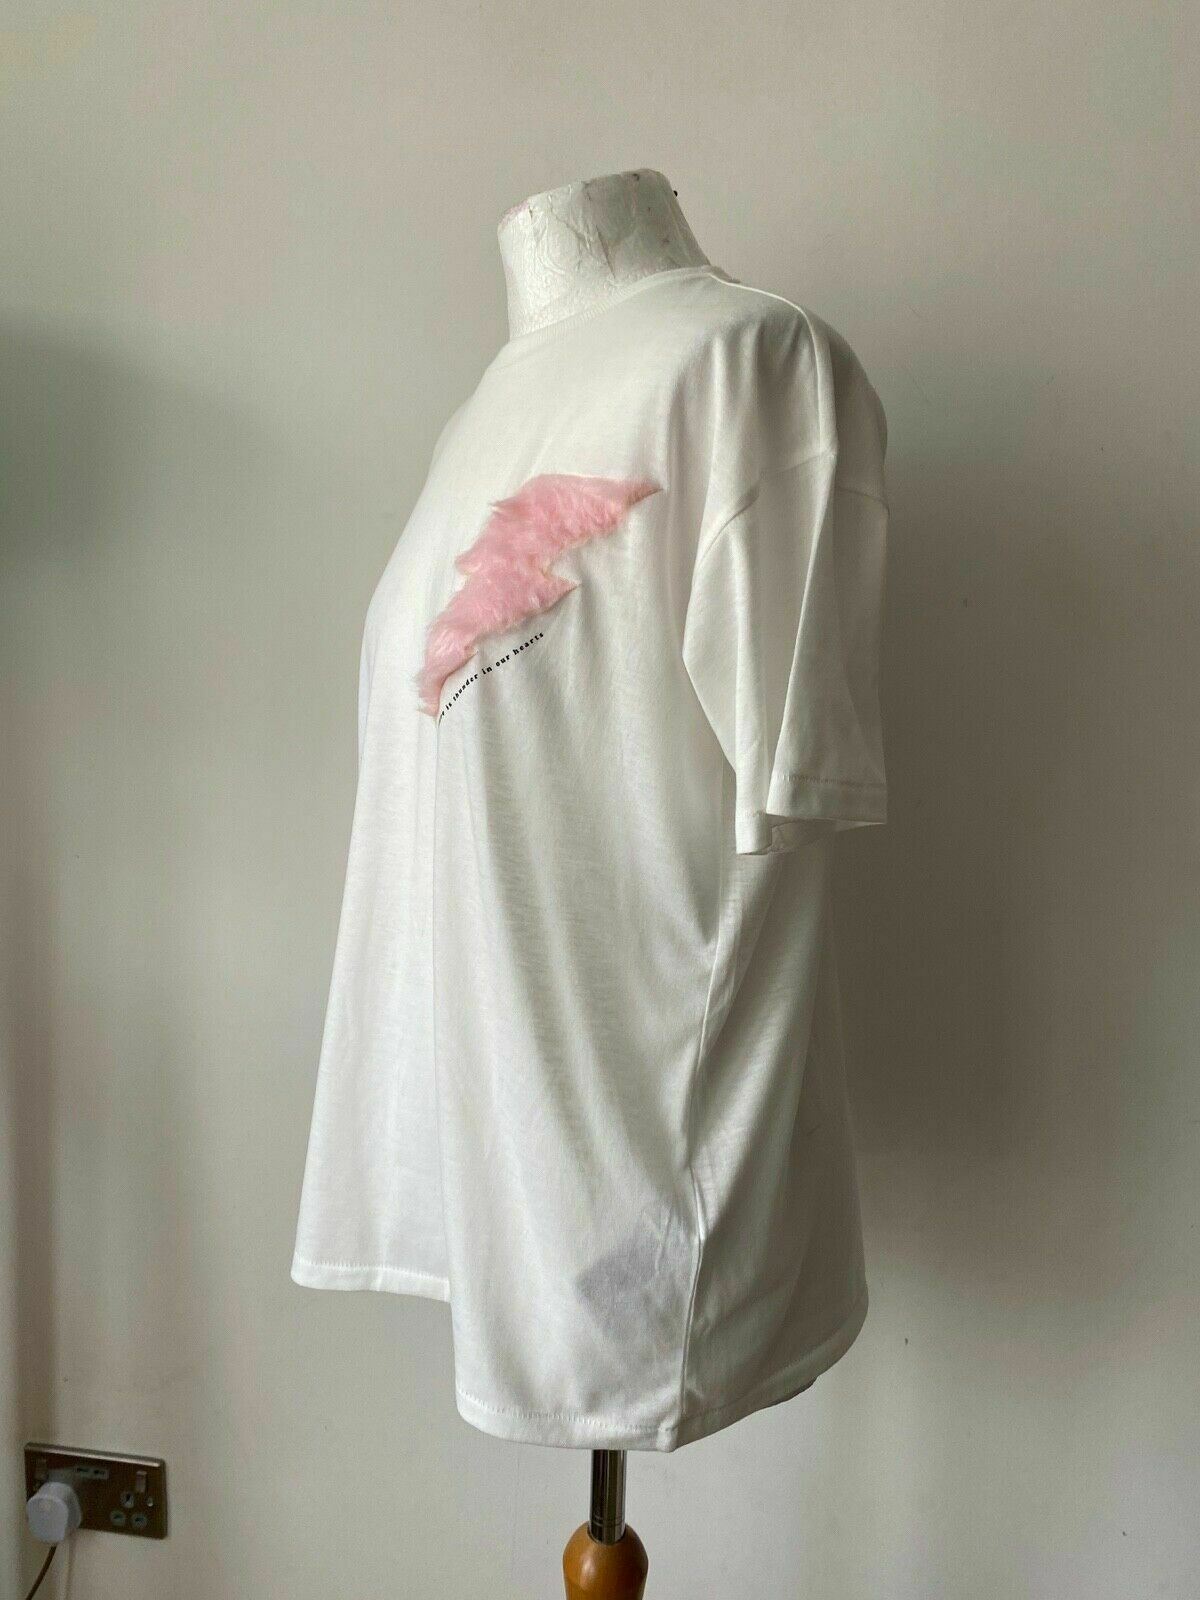 ONLY White T-Shirt With Pink Furry Lightning Box Motif Size M Pit to Pit 21"